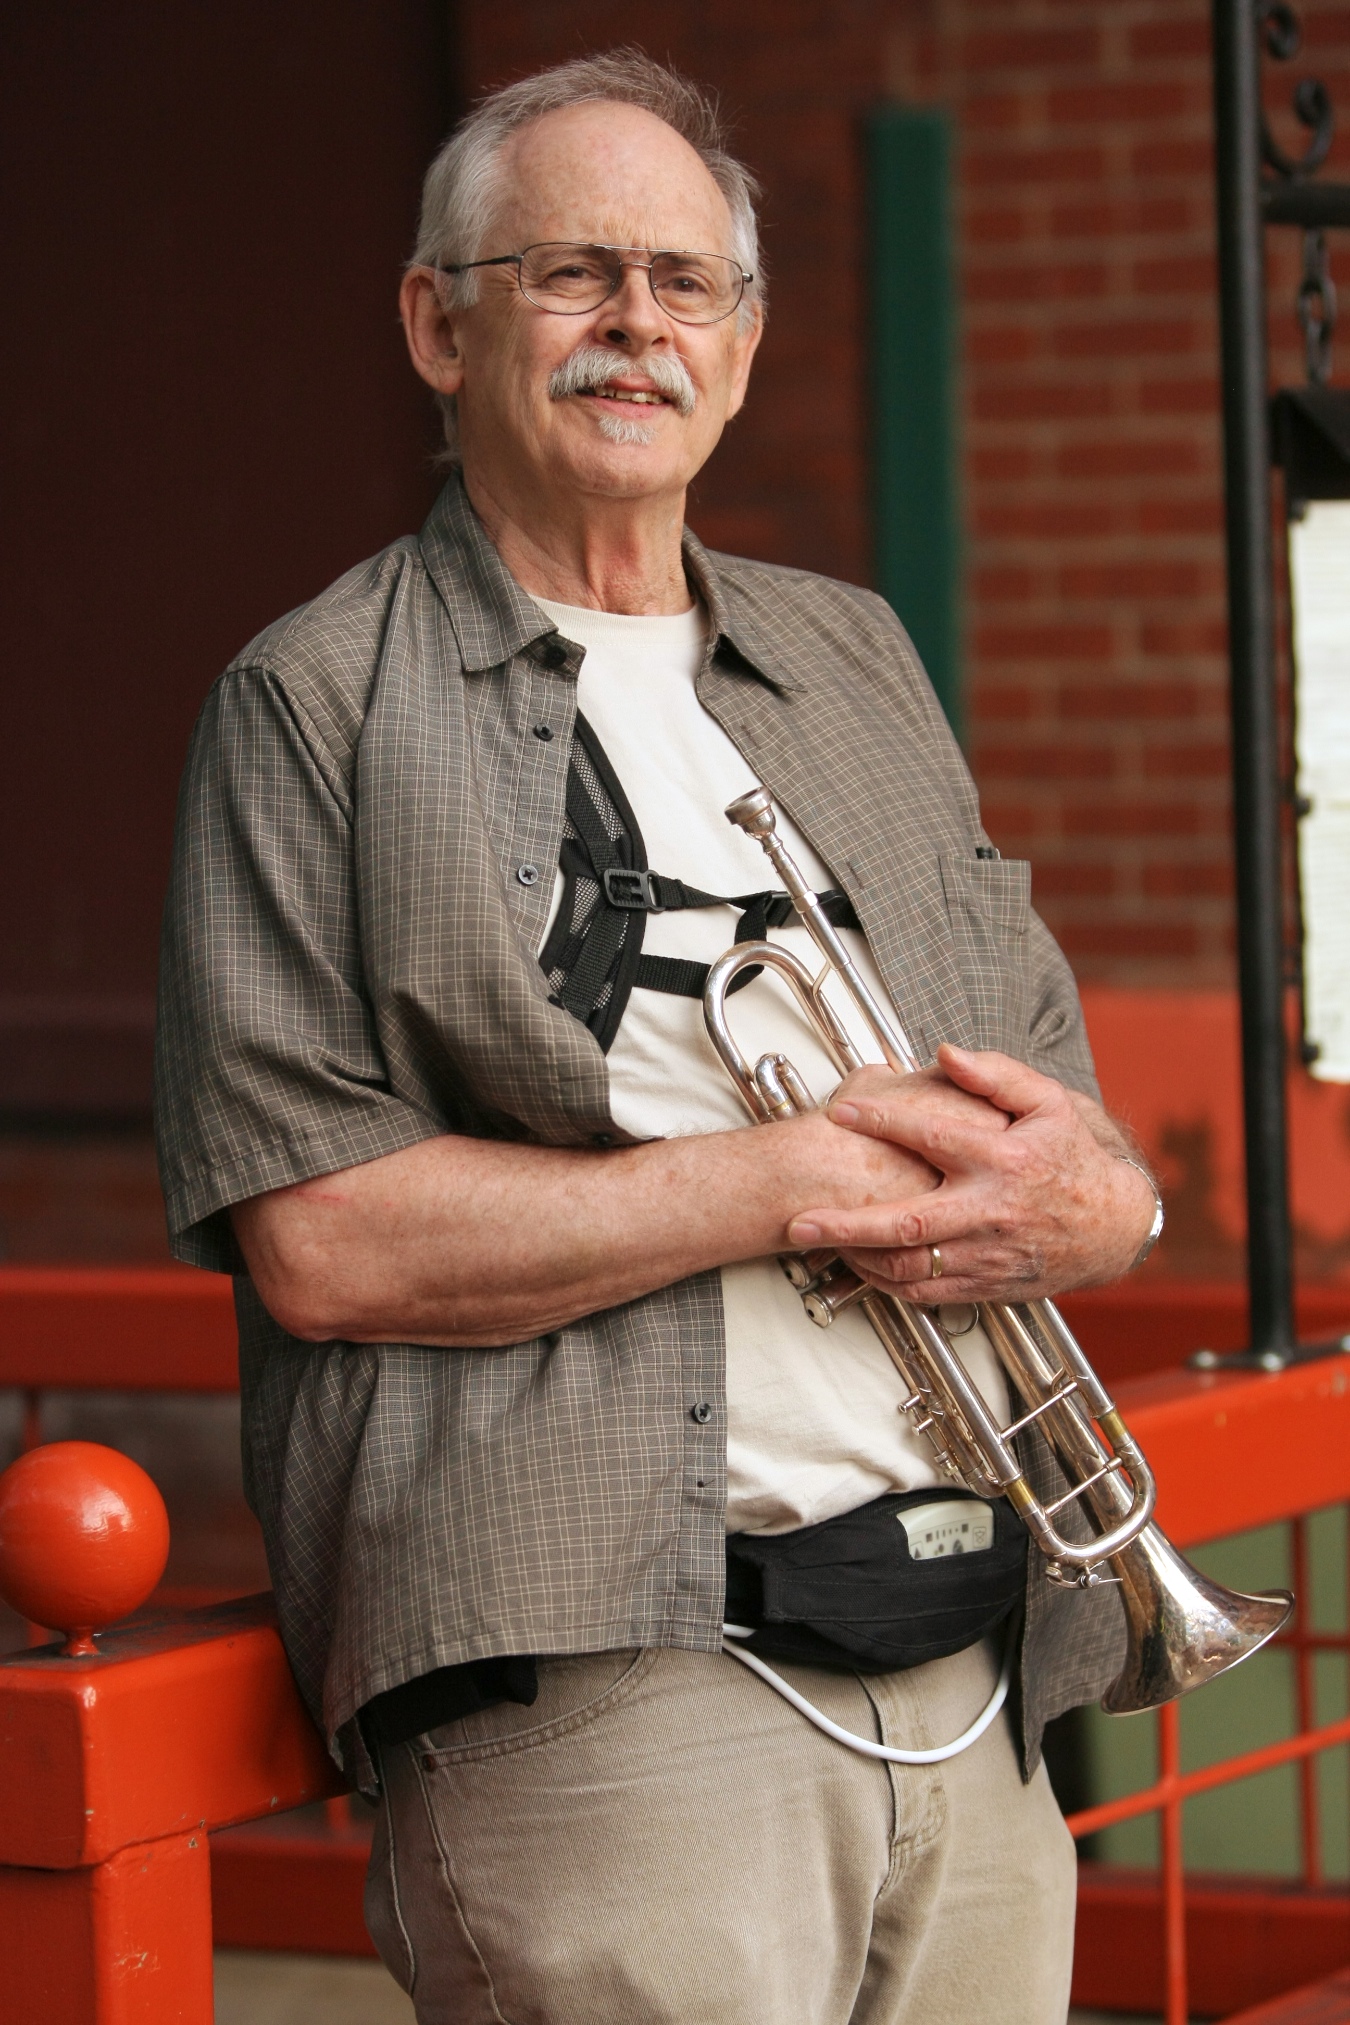 Paul Smoker, leaning up against a red metal fence, holding his trumpet; the external components of his LVAD are visible